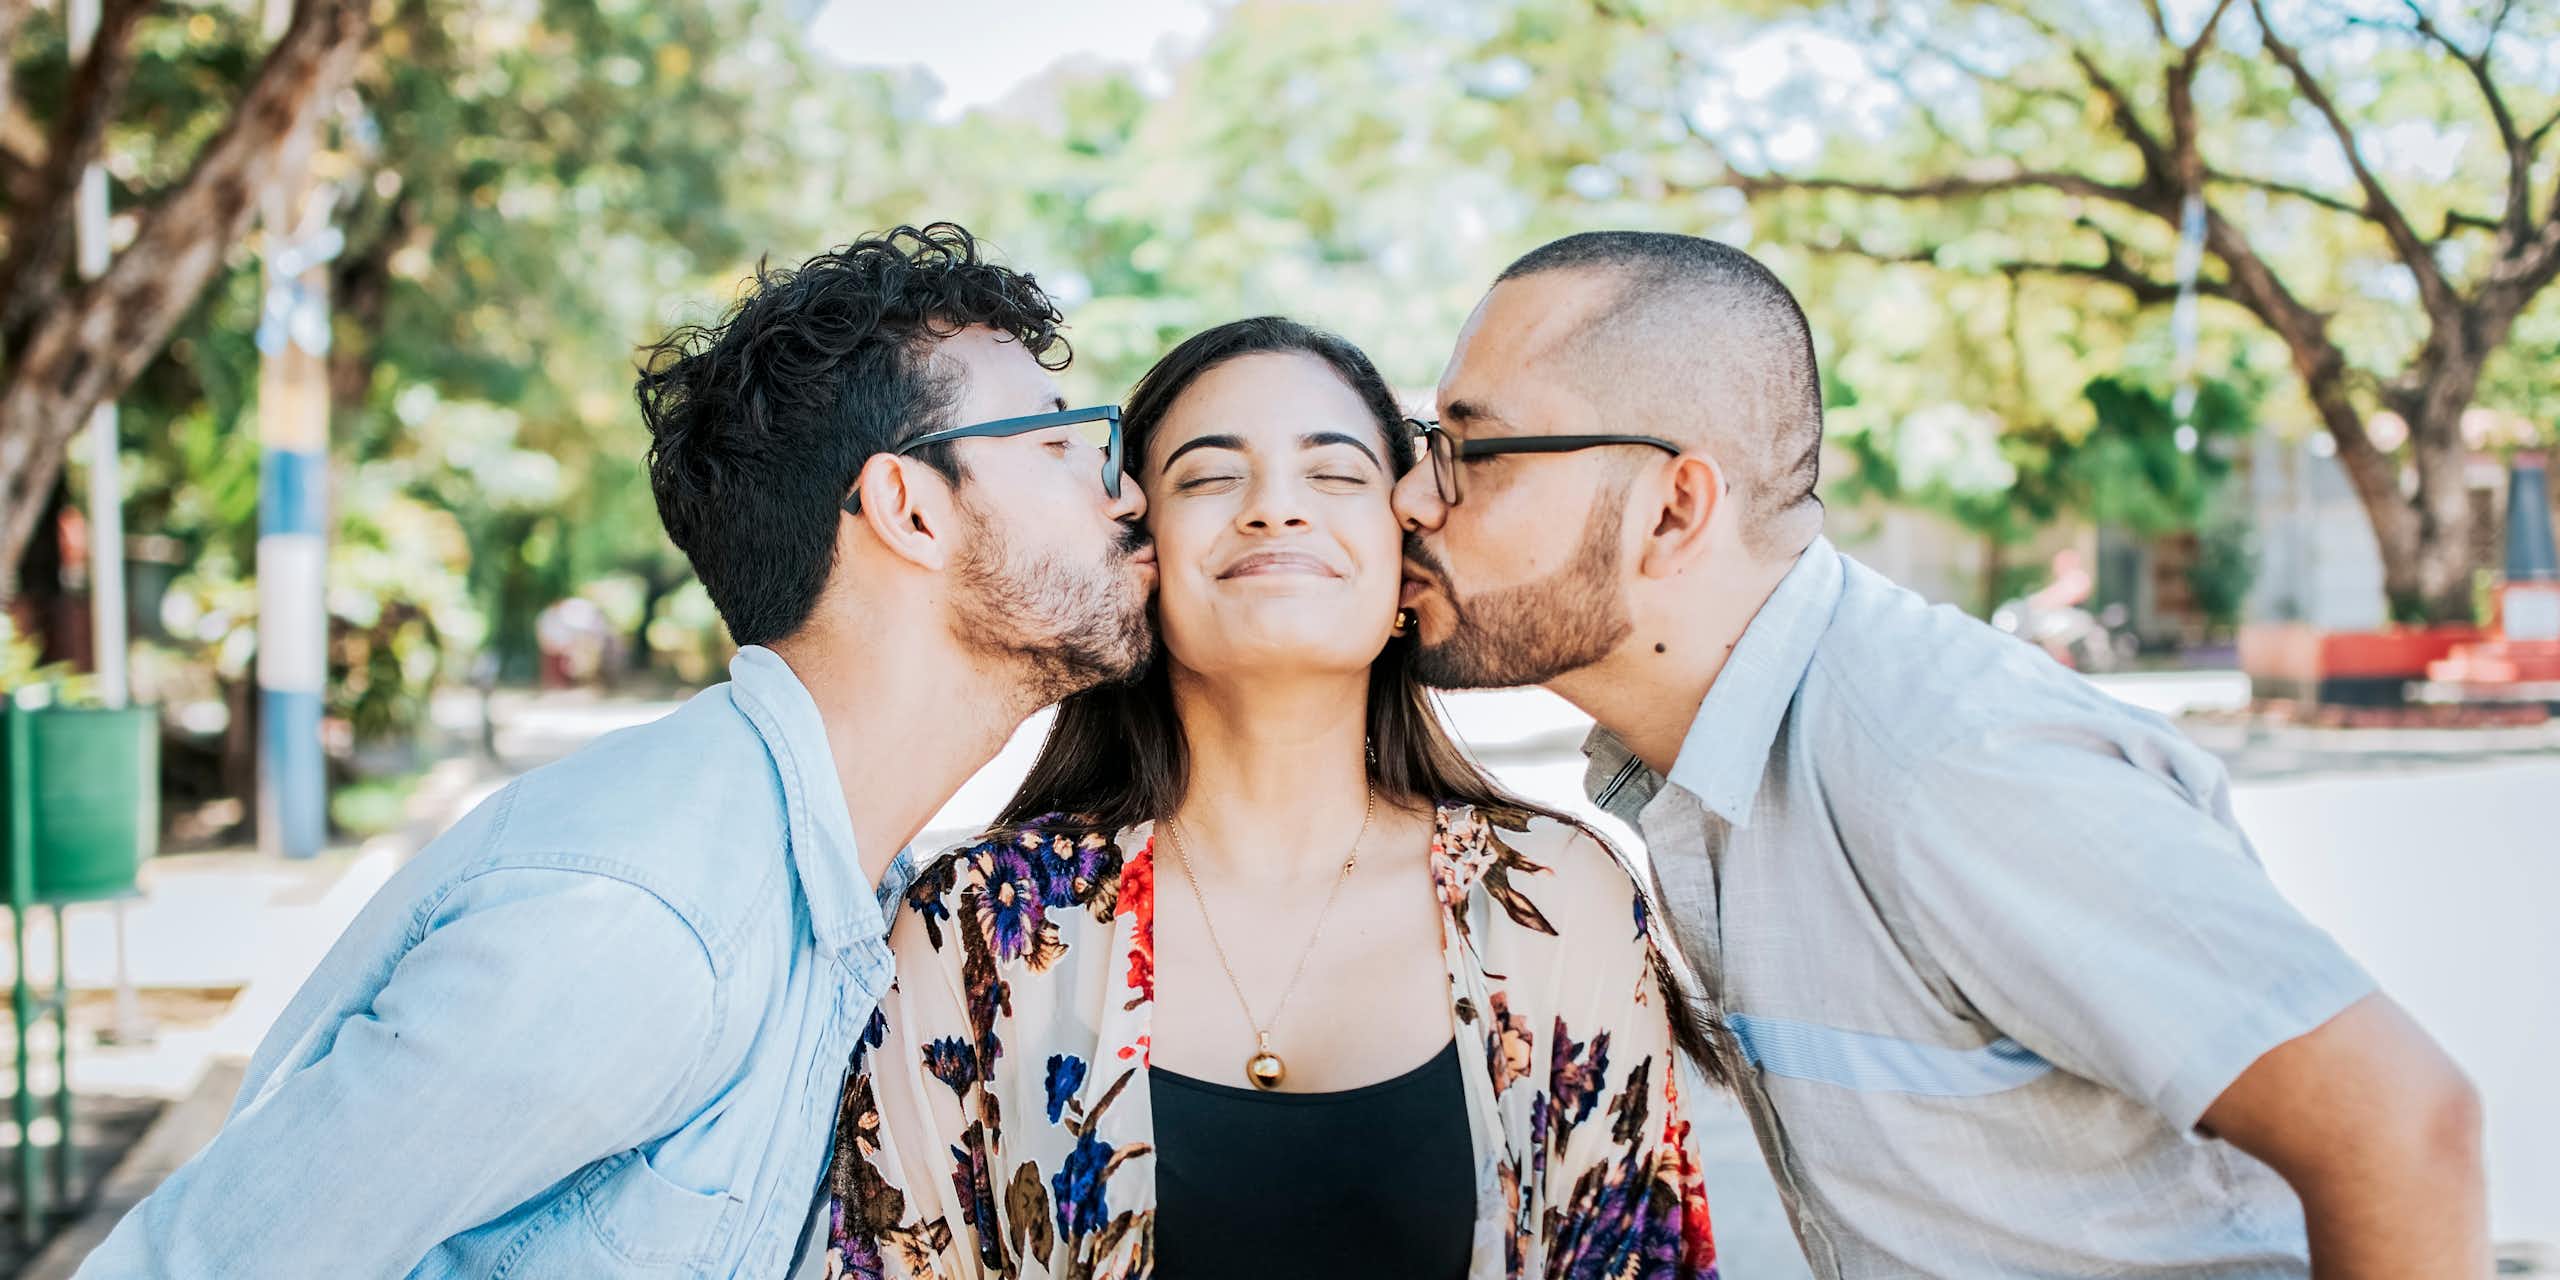 Two men kiss a woman on either cheek